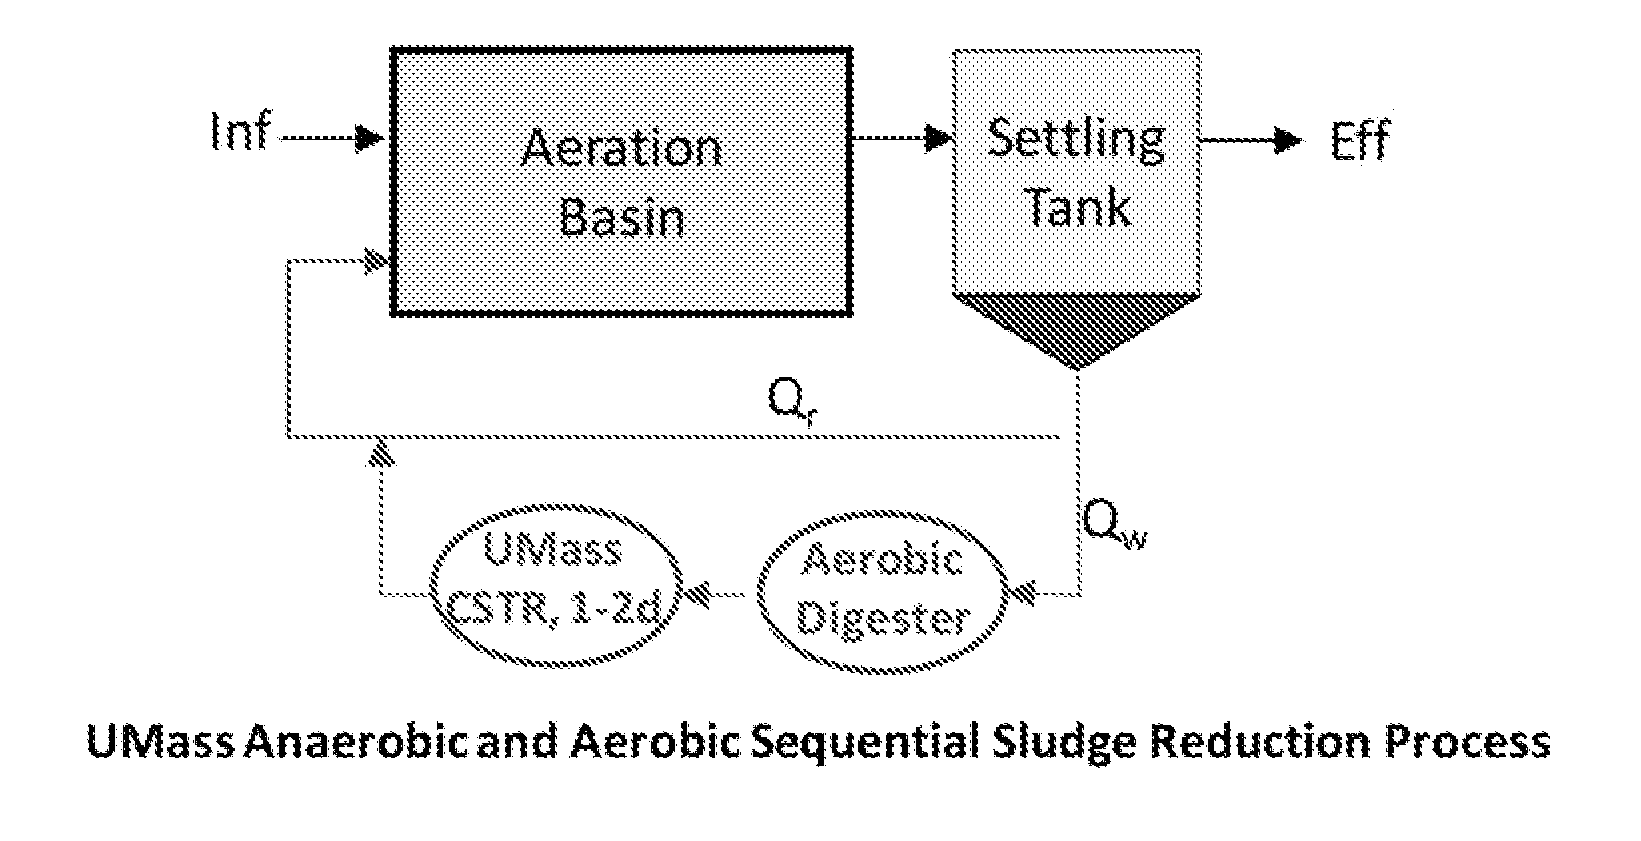 Method to reduce sludge generation in wastewater treatment systems